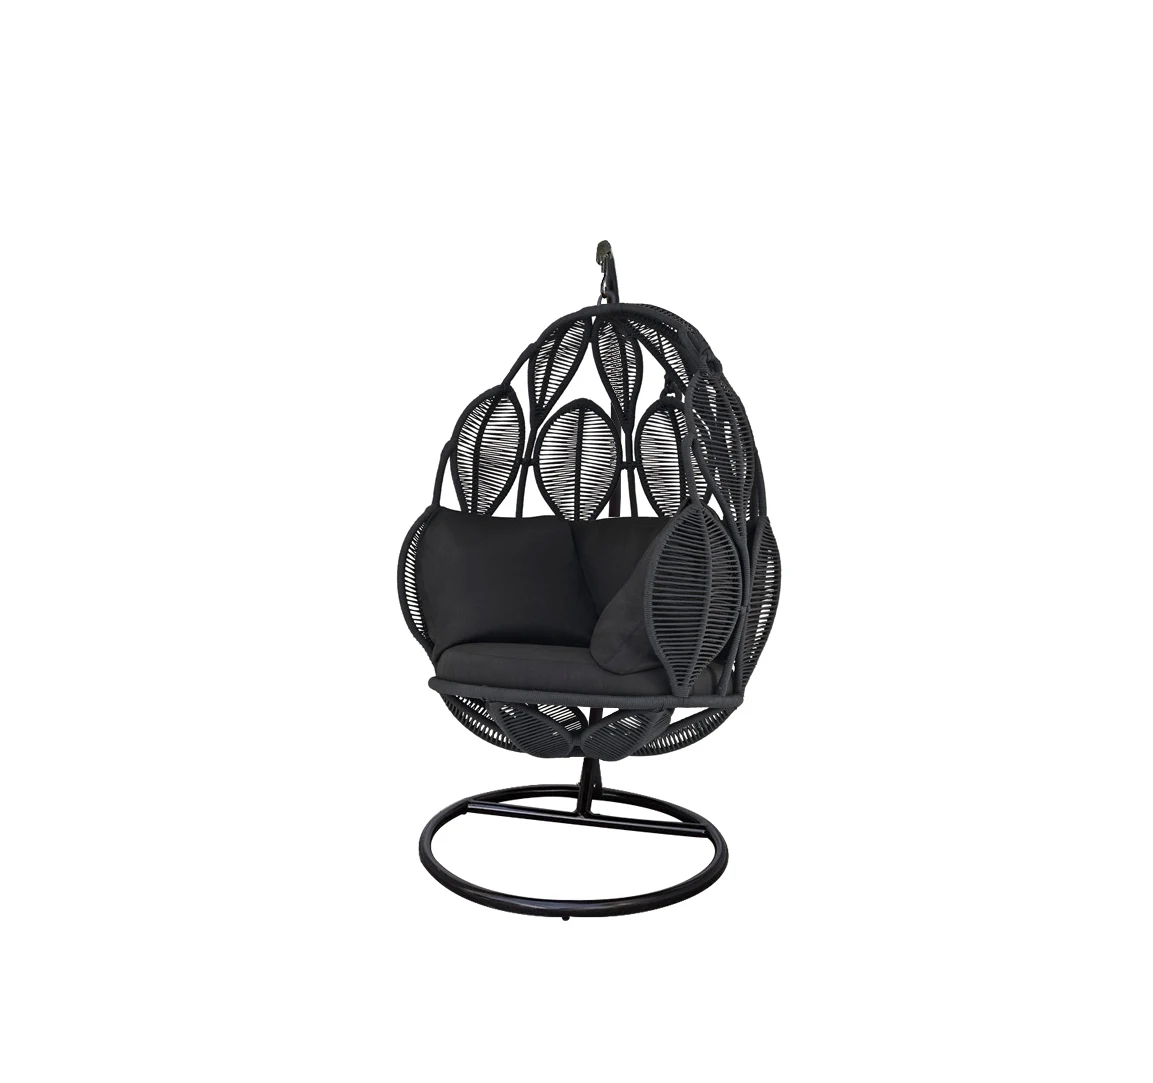 
Net star fashion outdoor girl dream swing outdoor leisure, suitable for two people can rotate rattan hanging chair 